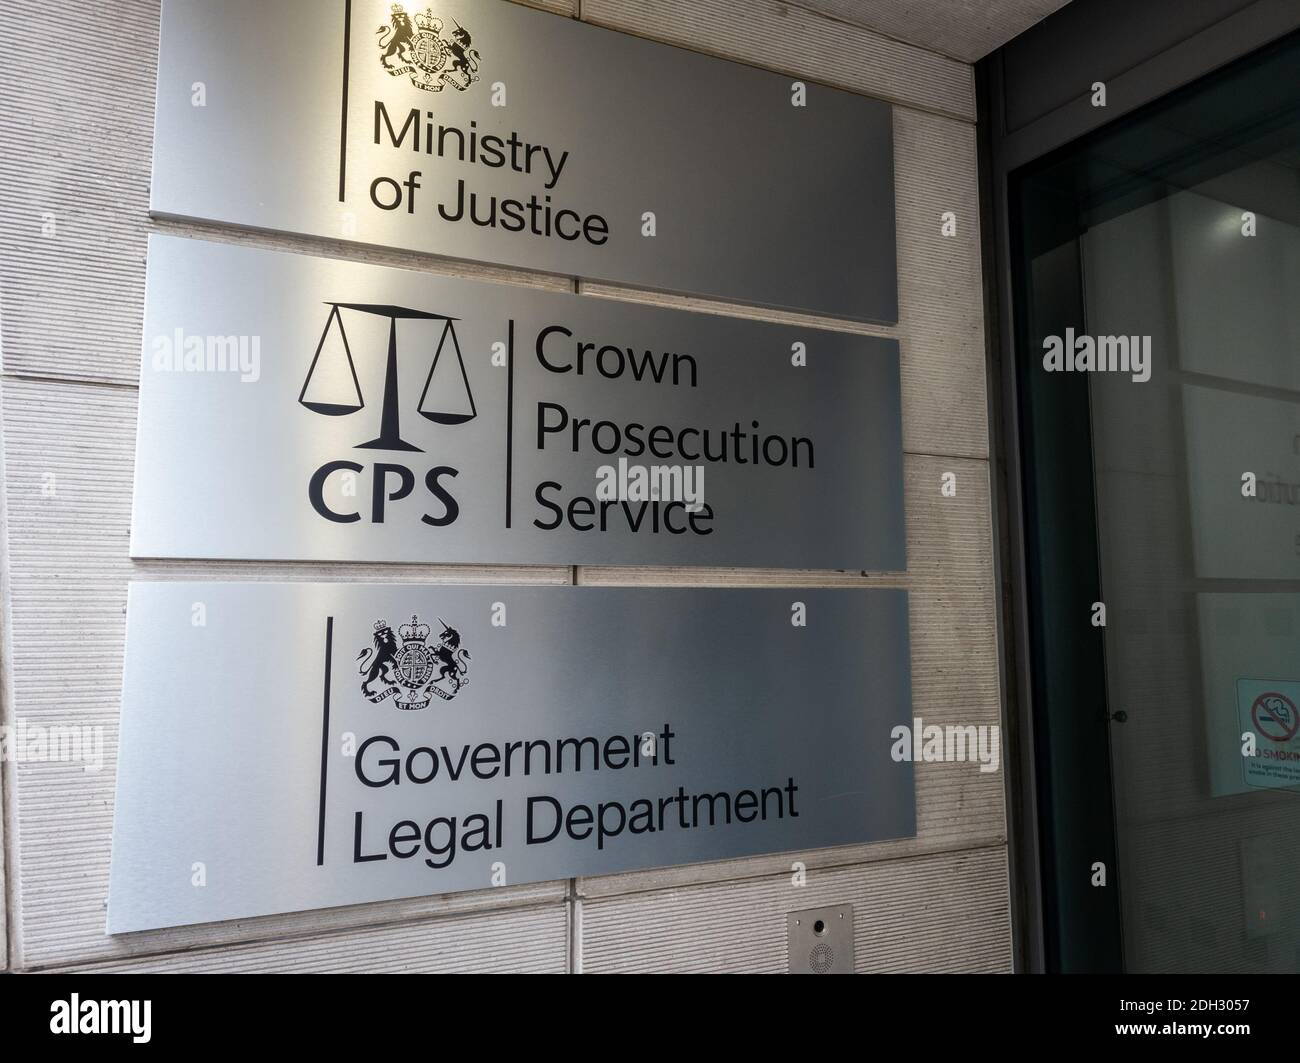 The Government Legal Department in Petty France, London, responsible for the justice system and prosecution of offenders. Stock Photo